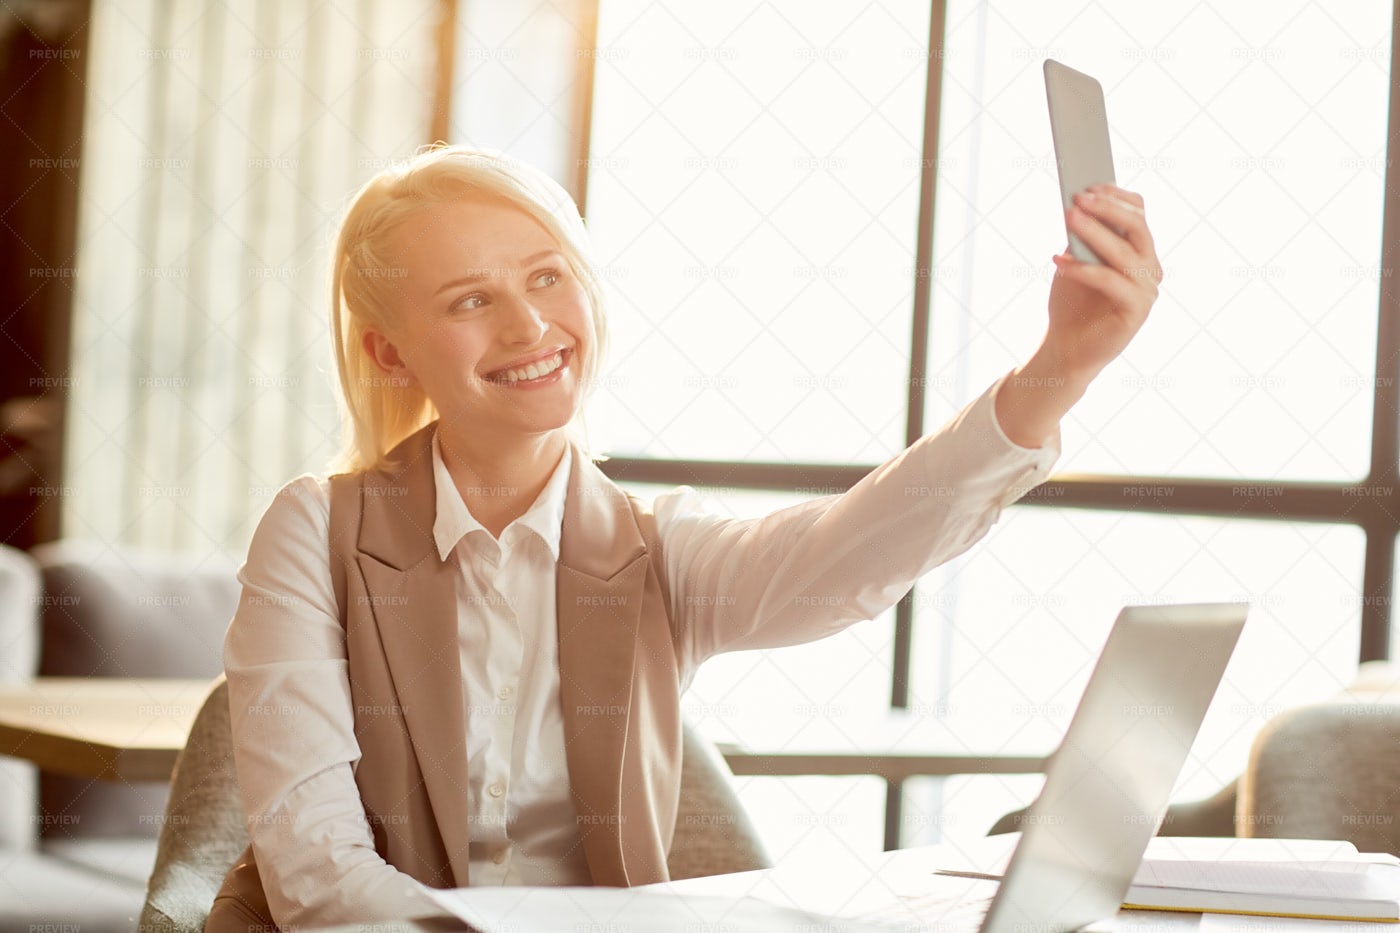 Selfie Of Young Manager: Stock Photos